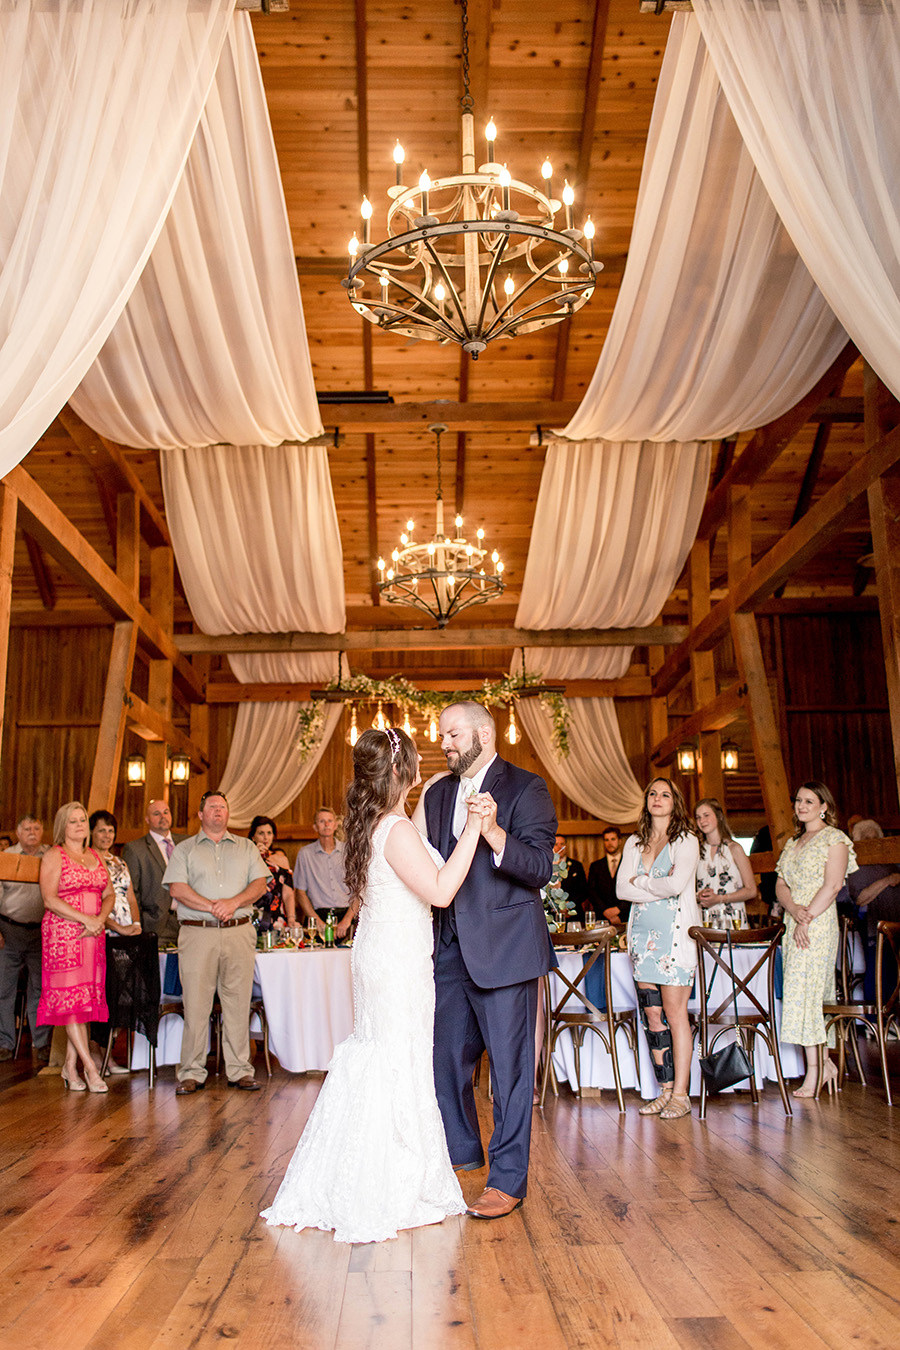 couple shares their first dance in the barn